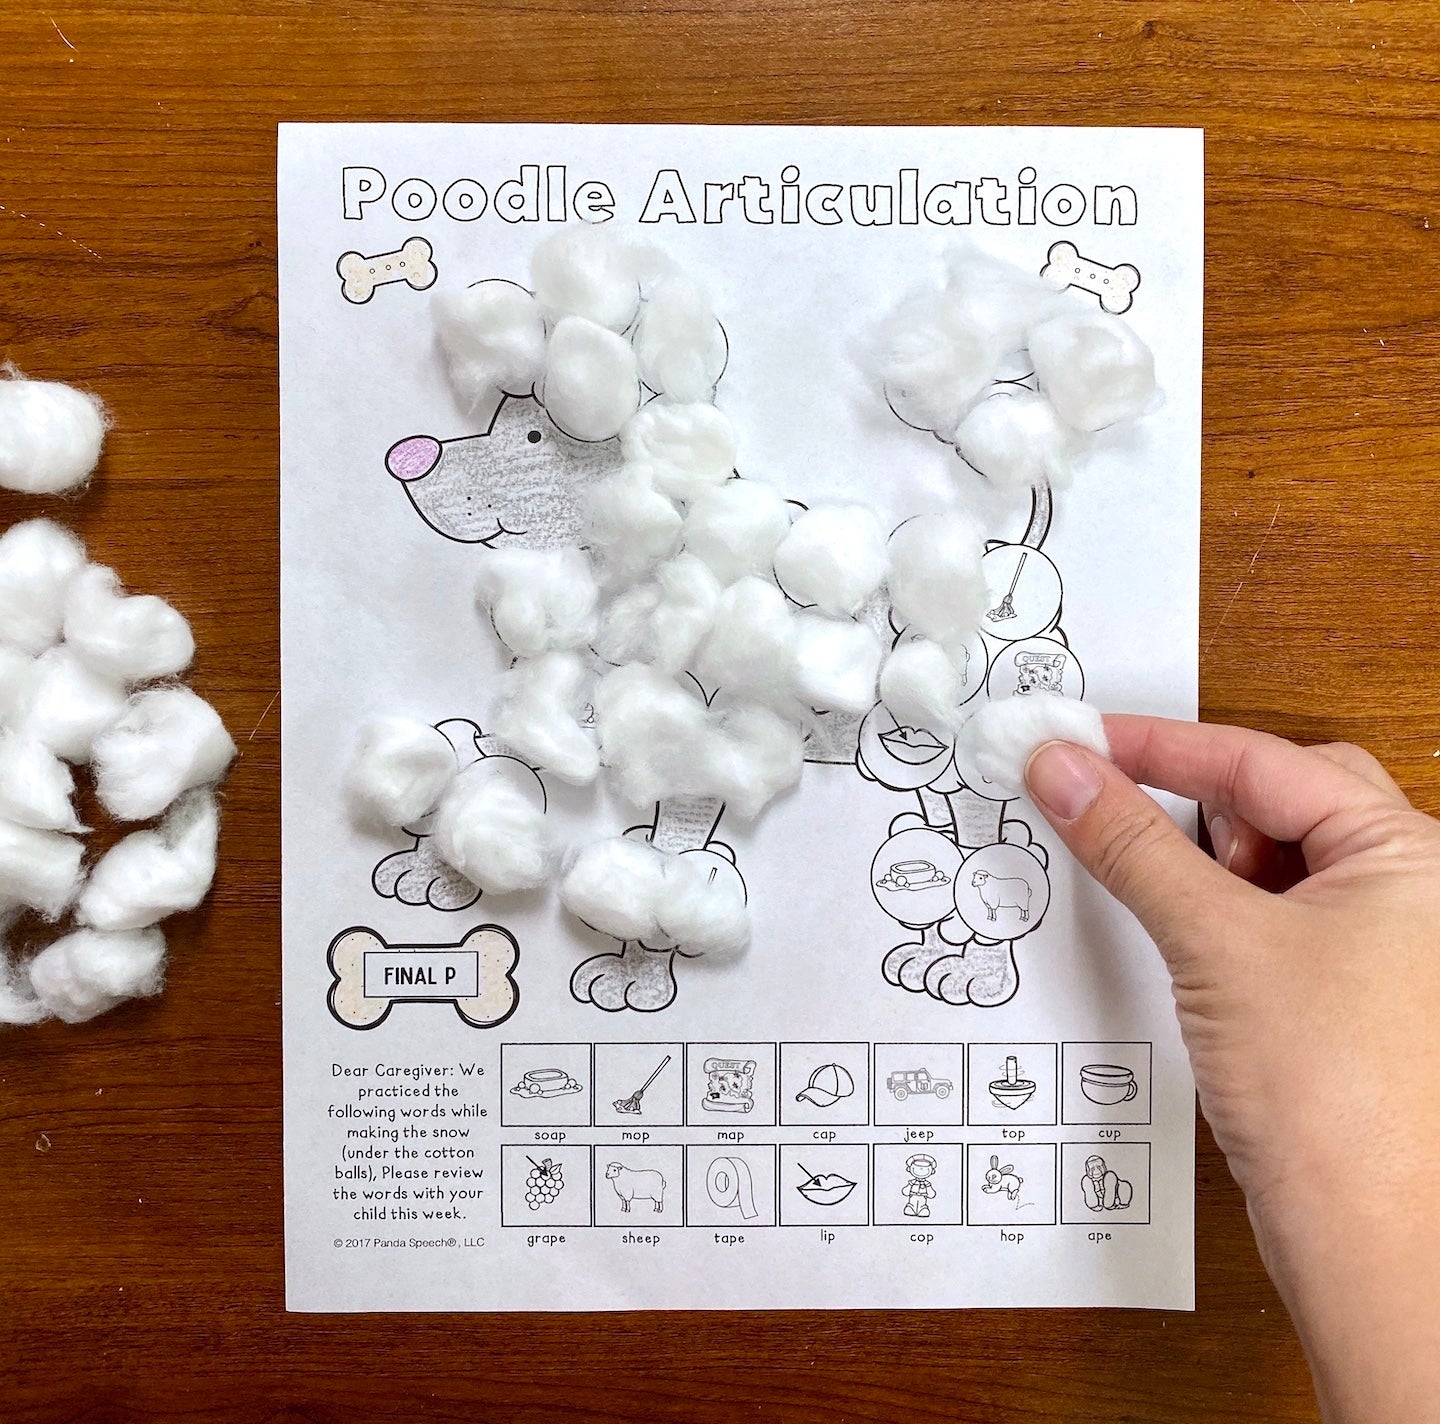 Poodle Articulation and Language! Speech Therapy Cotton Ball craft